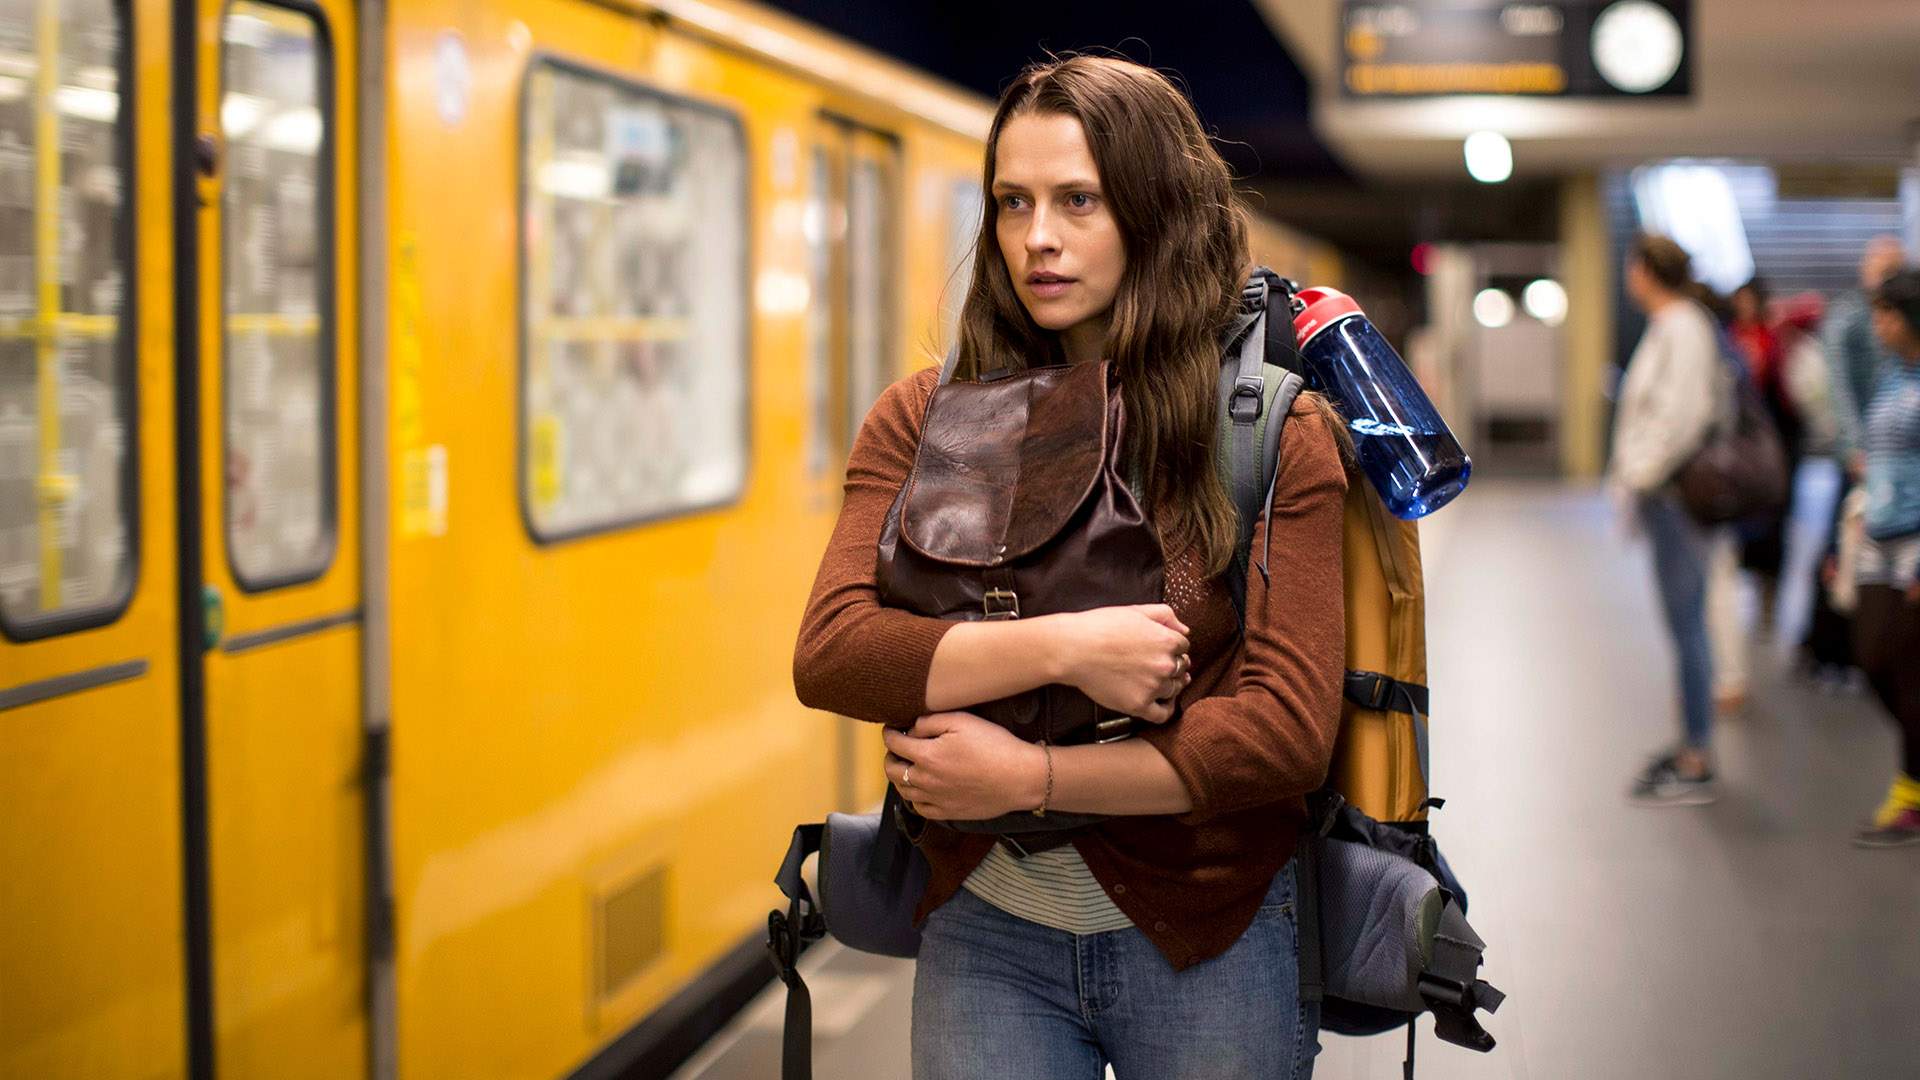 We're Hosting An Advanced Screening of 'Berlin Syndrome' in Sydney